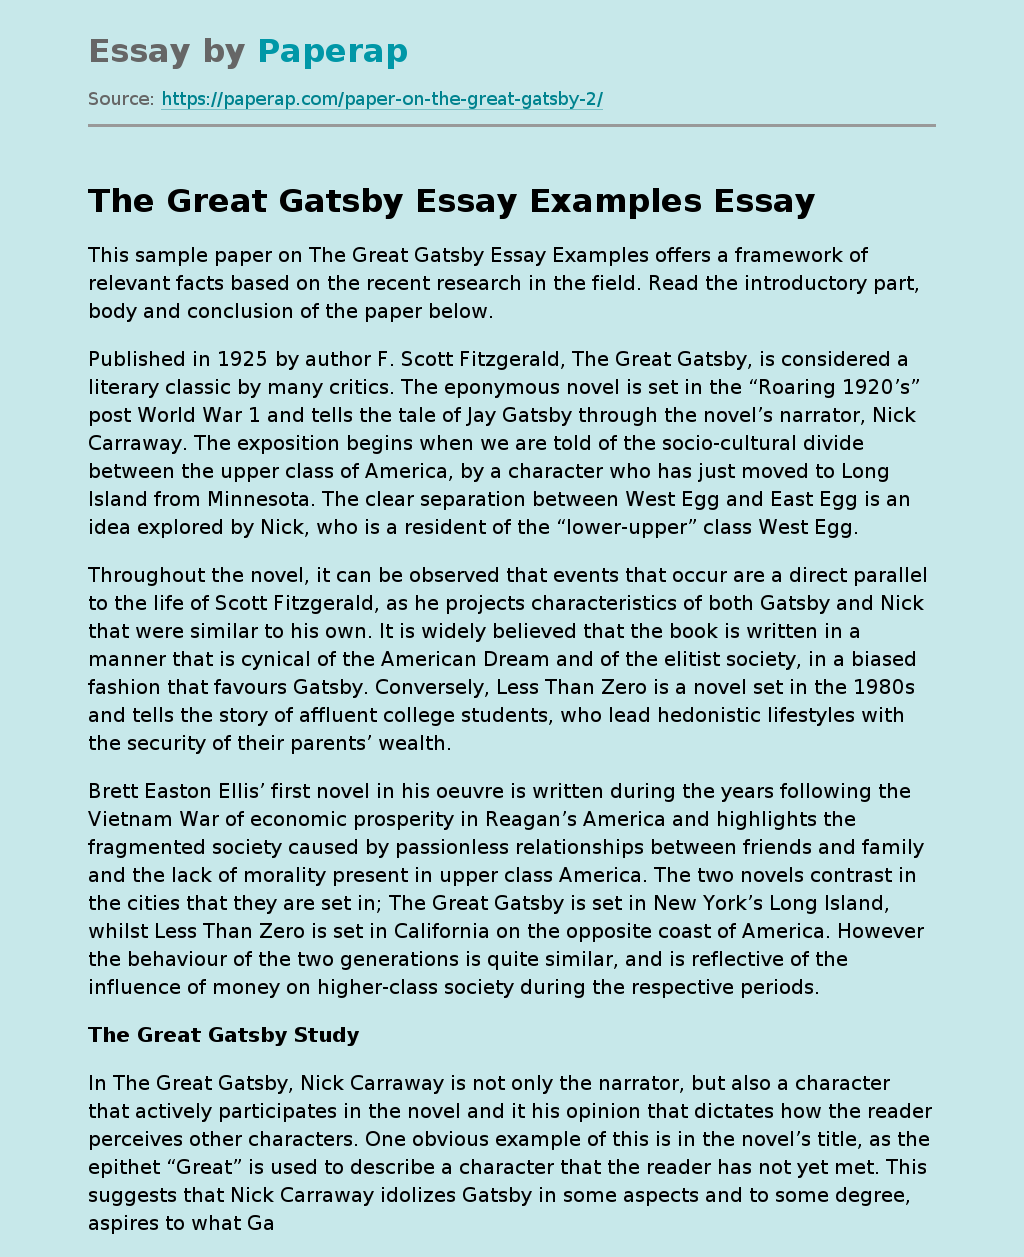 The Great Gatsby Essay Examples